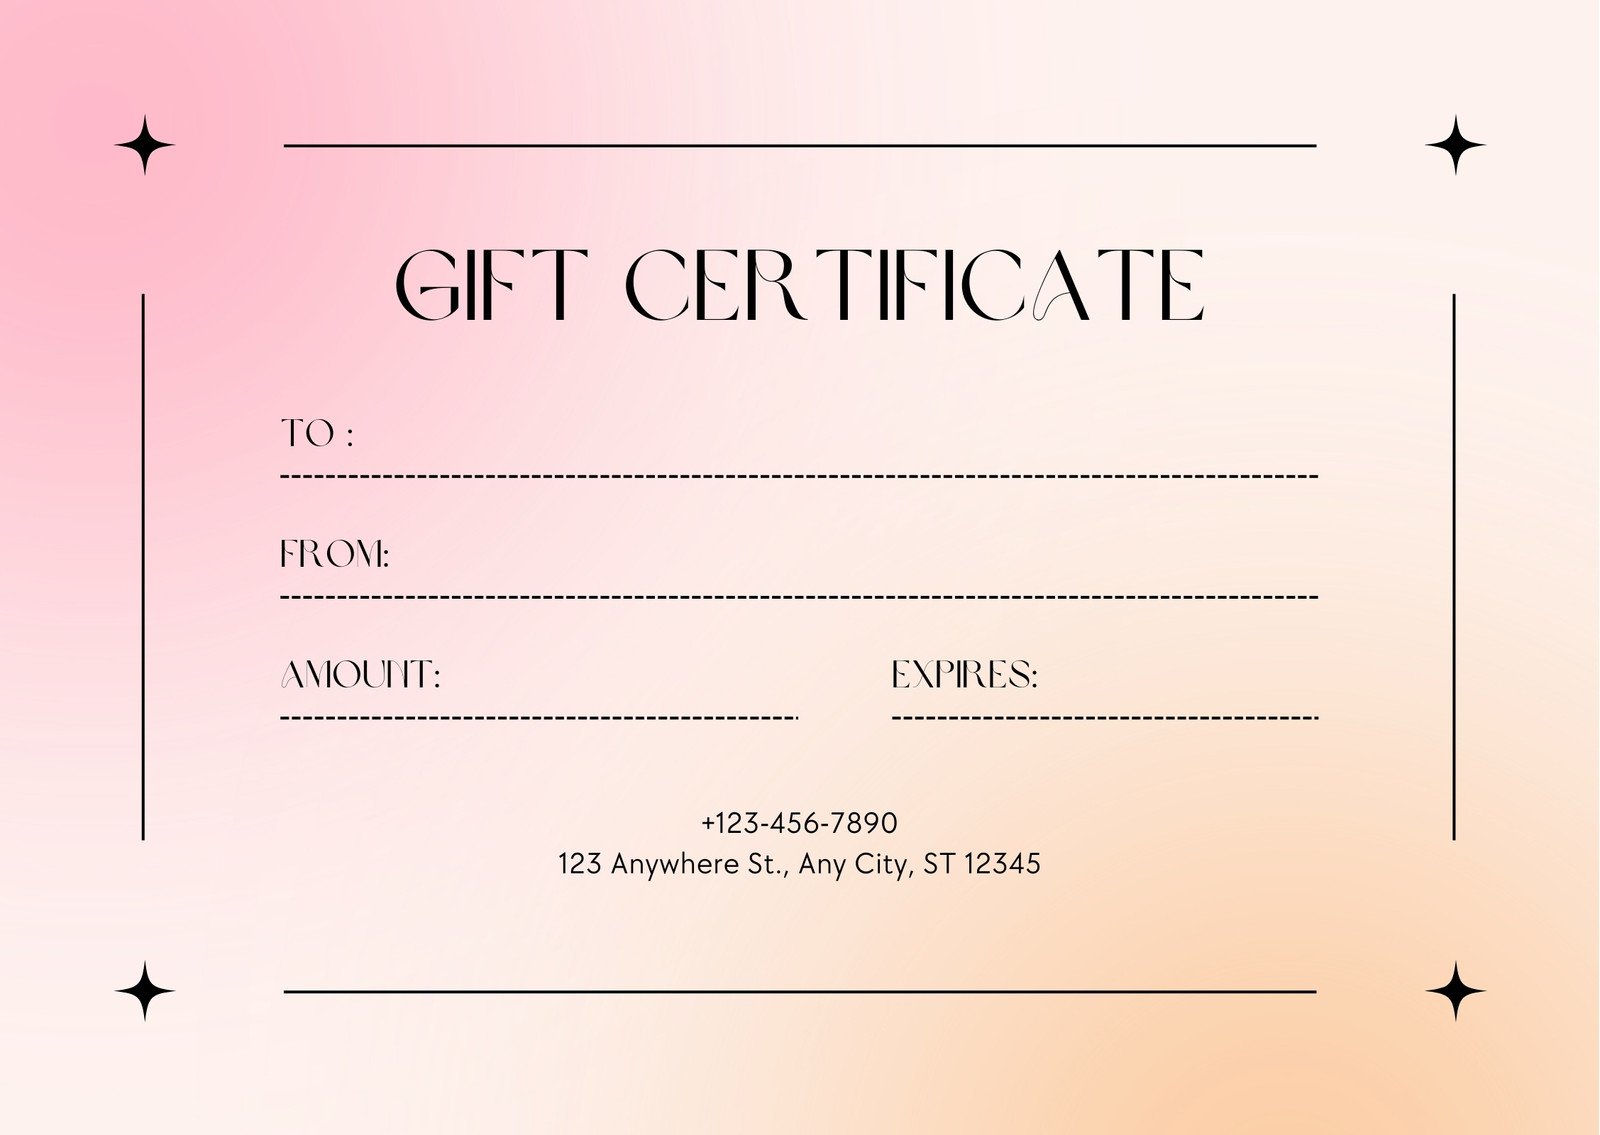 Build a Bear Workshop Gift Certificate Free Printable 1, OP Templates